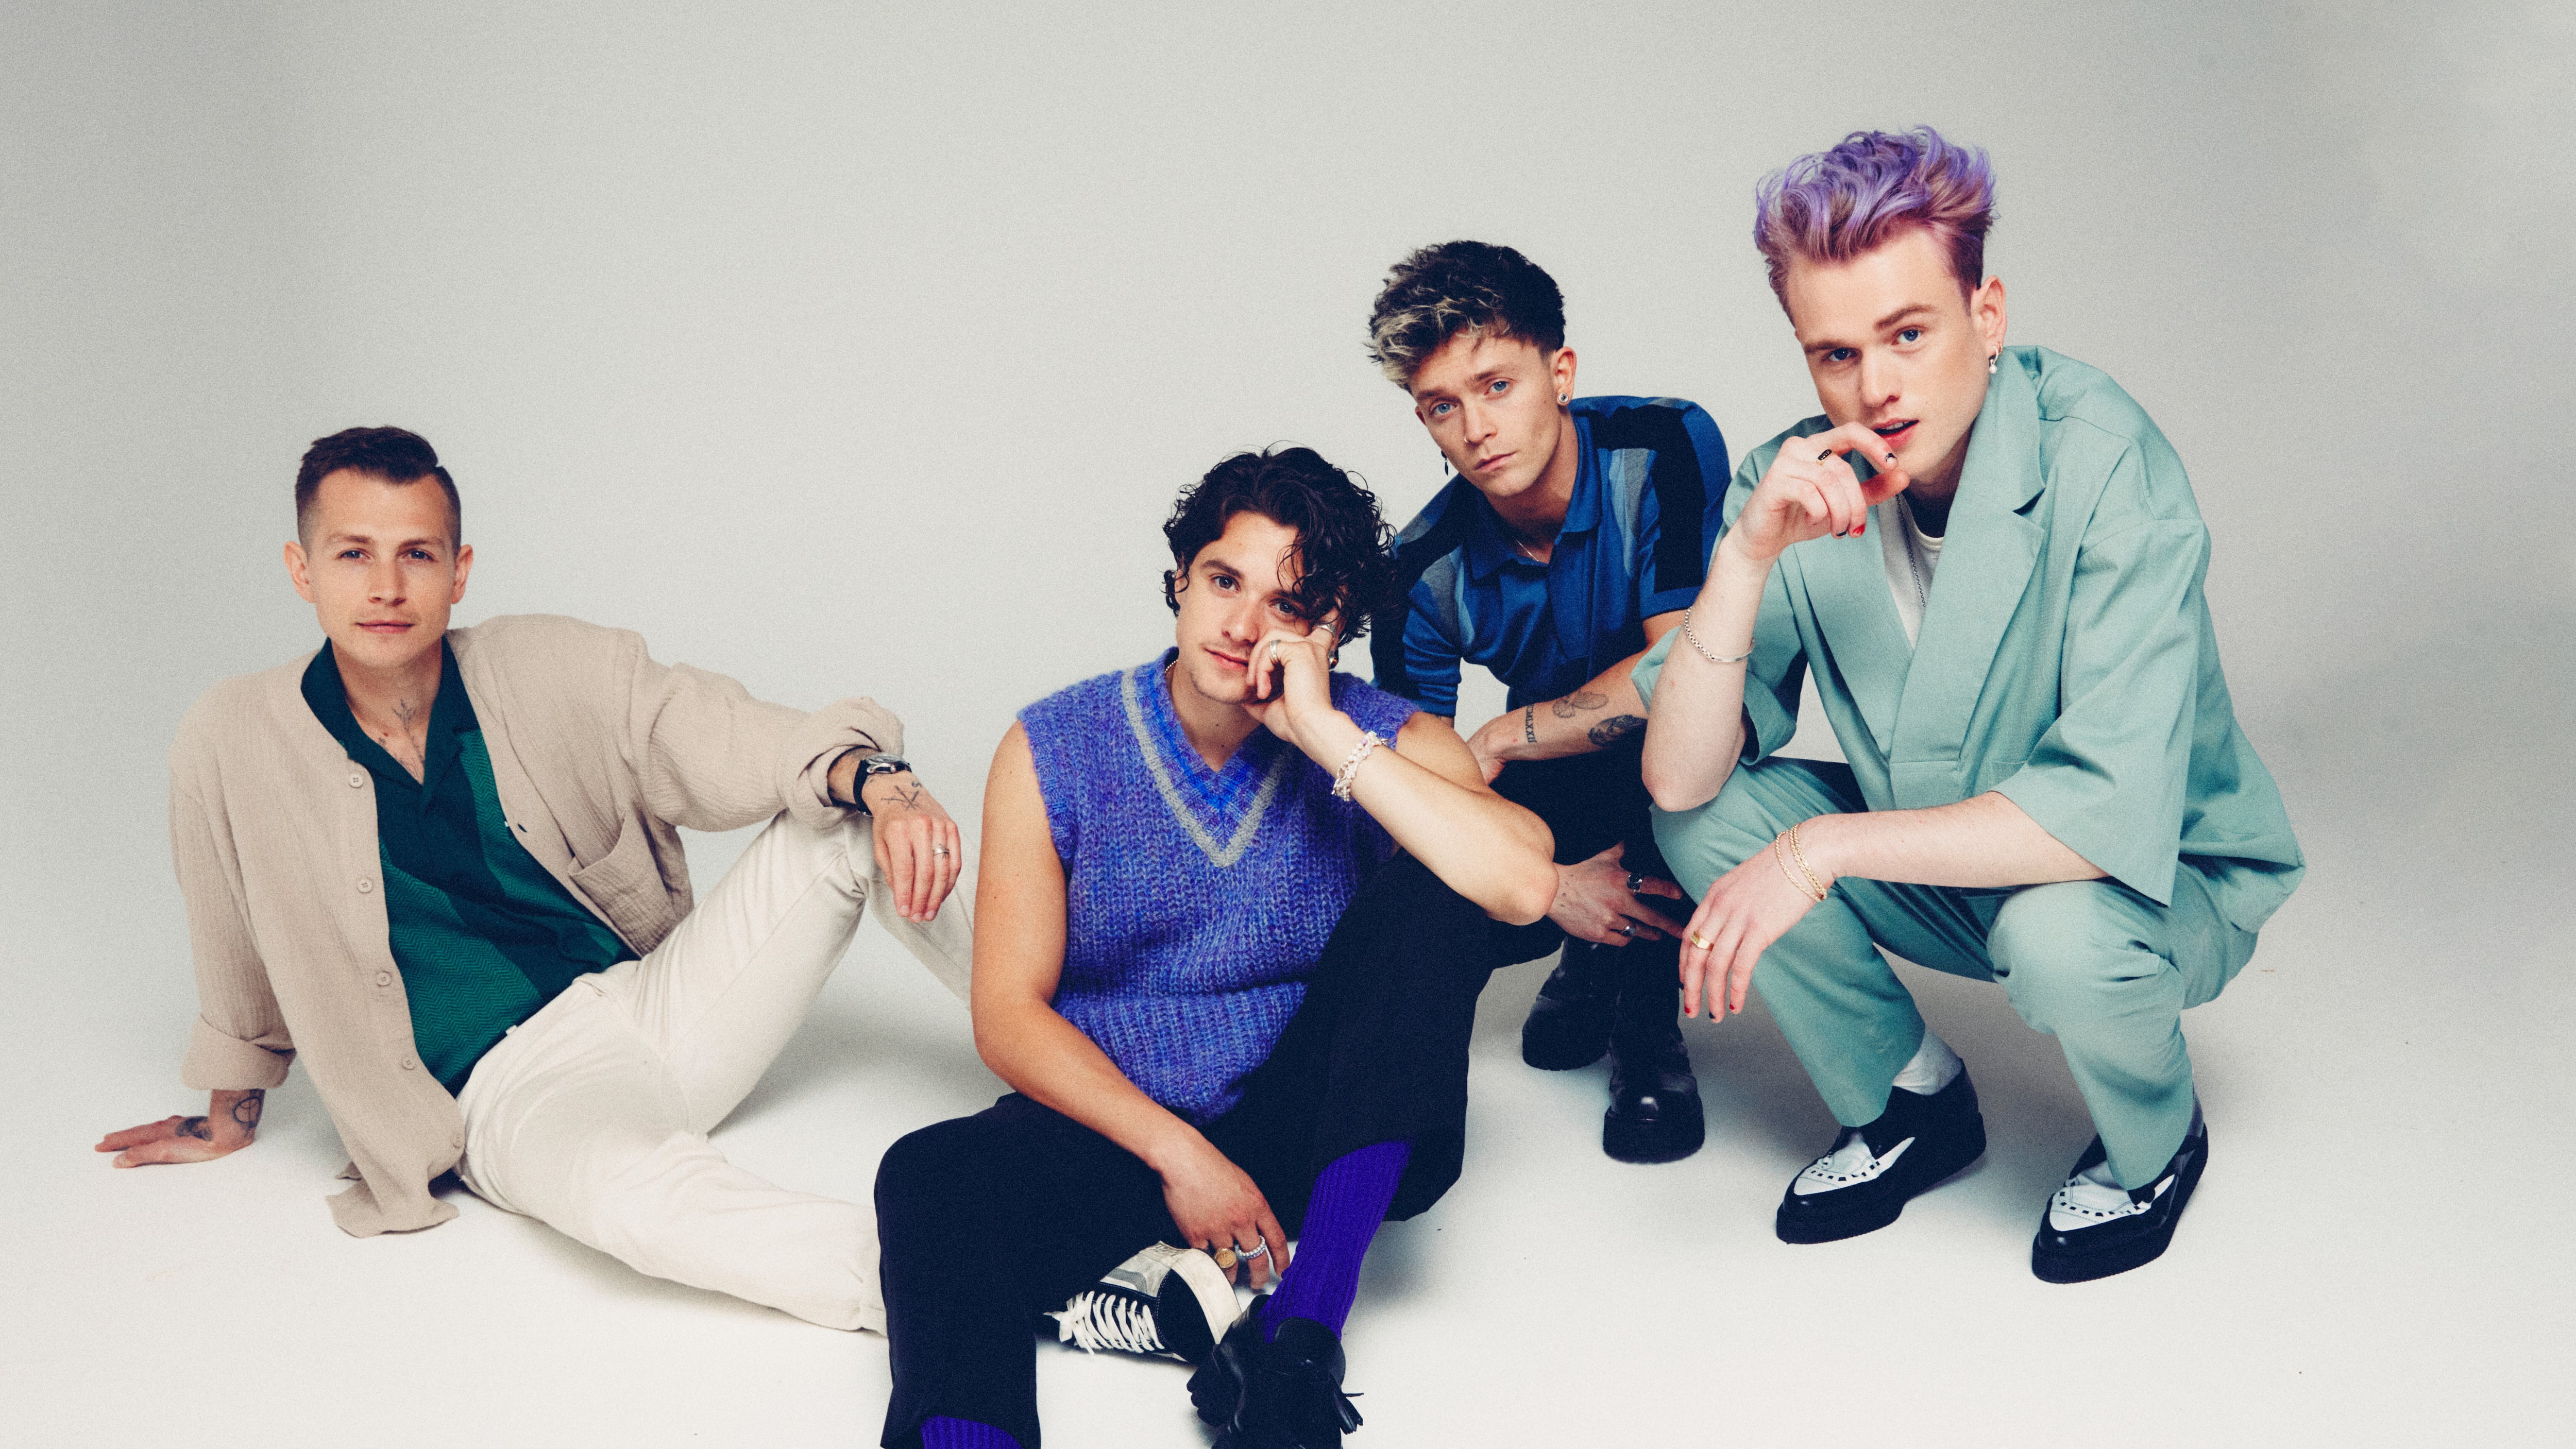 Pop-rock band The Vamps headline the Saturday eventing of Camp Dalfest at Glenarm Castle